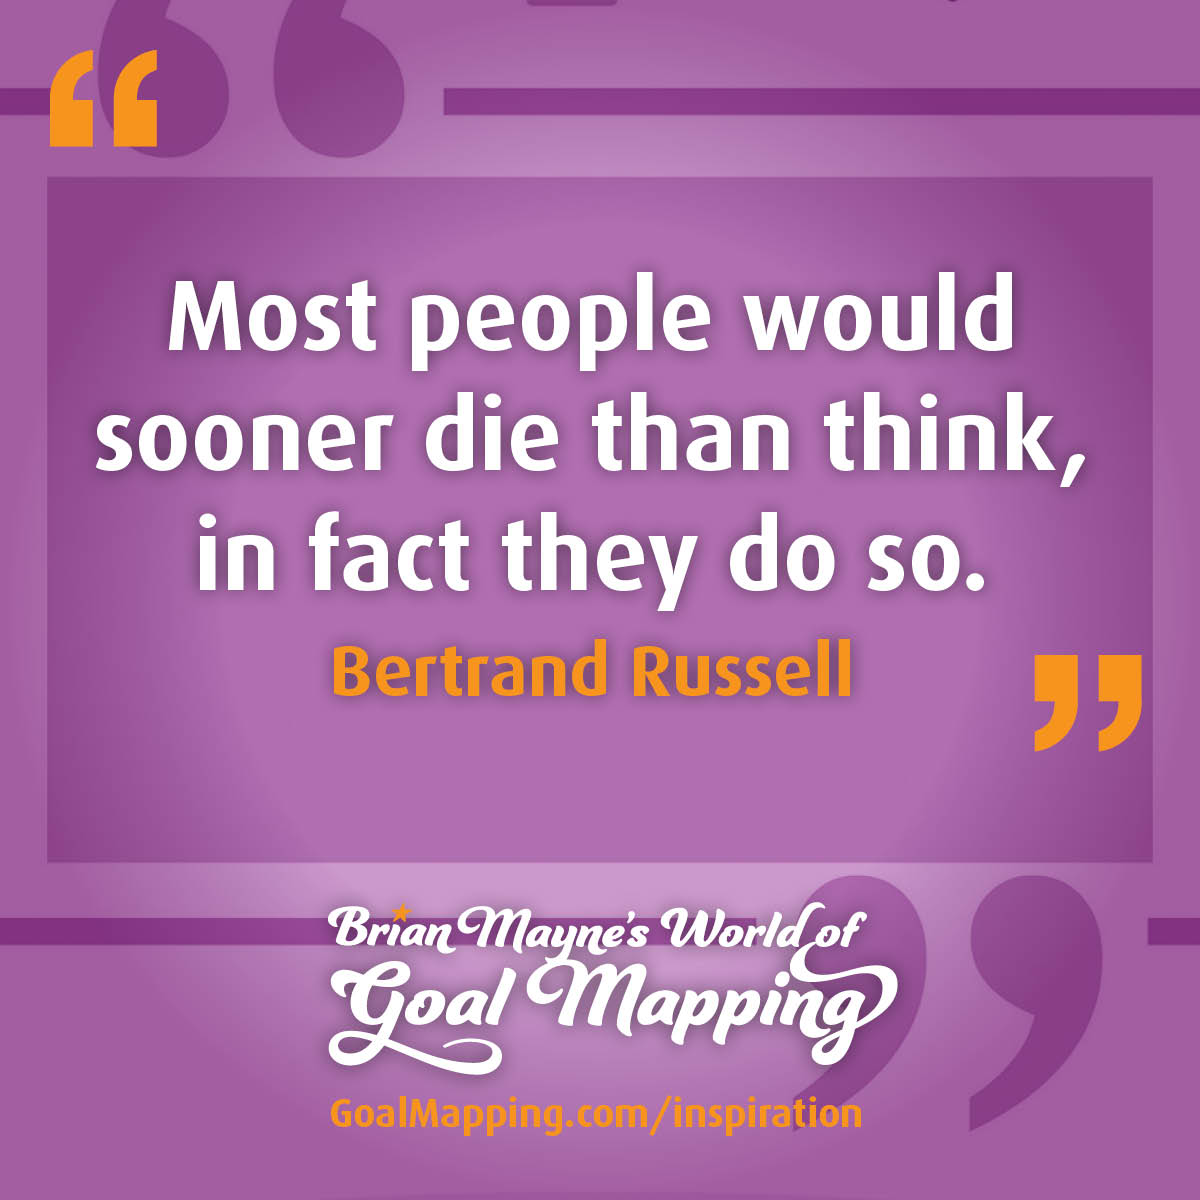 "Most people would sooner die than think, in fact they do so." Bertrand Russell